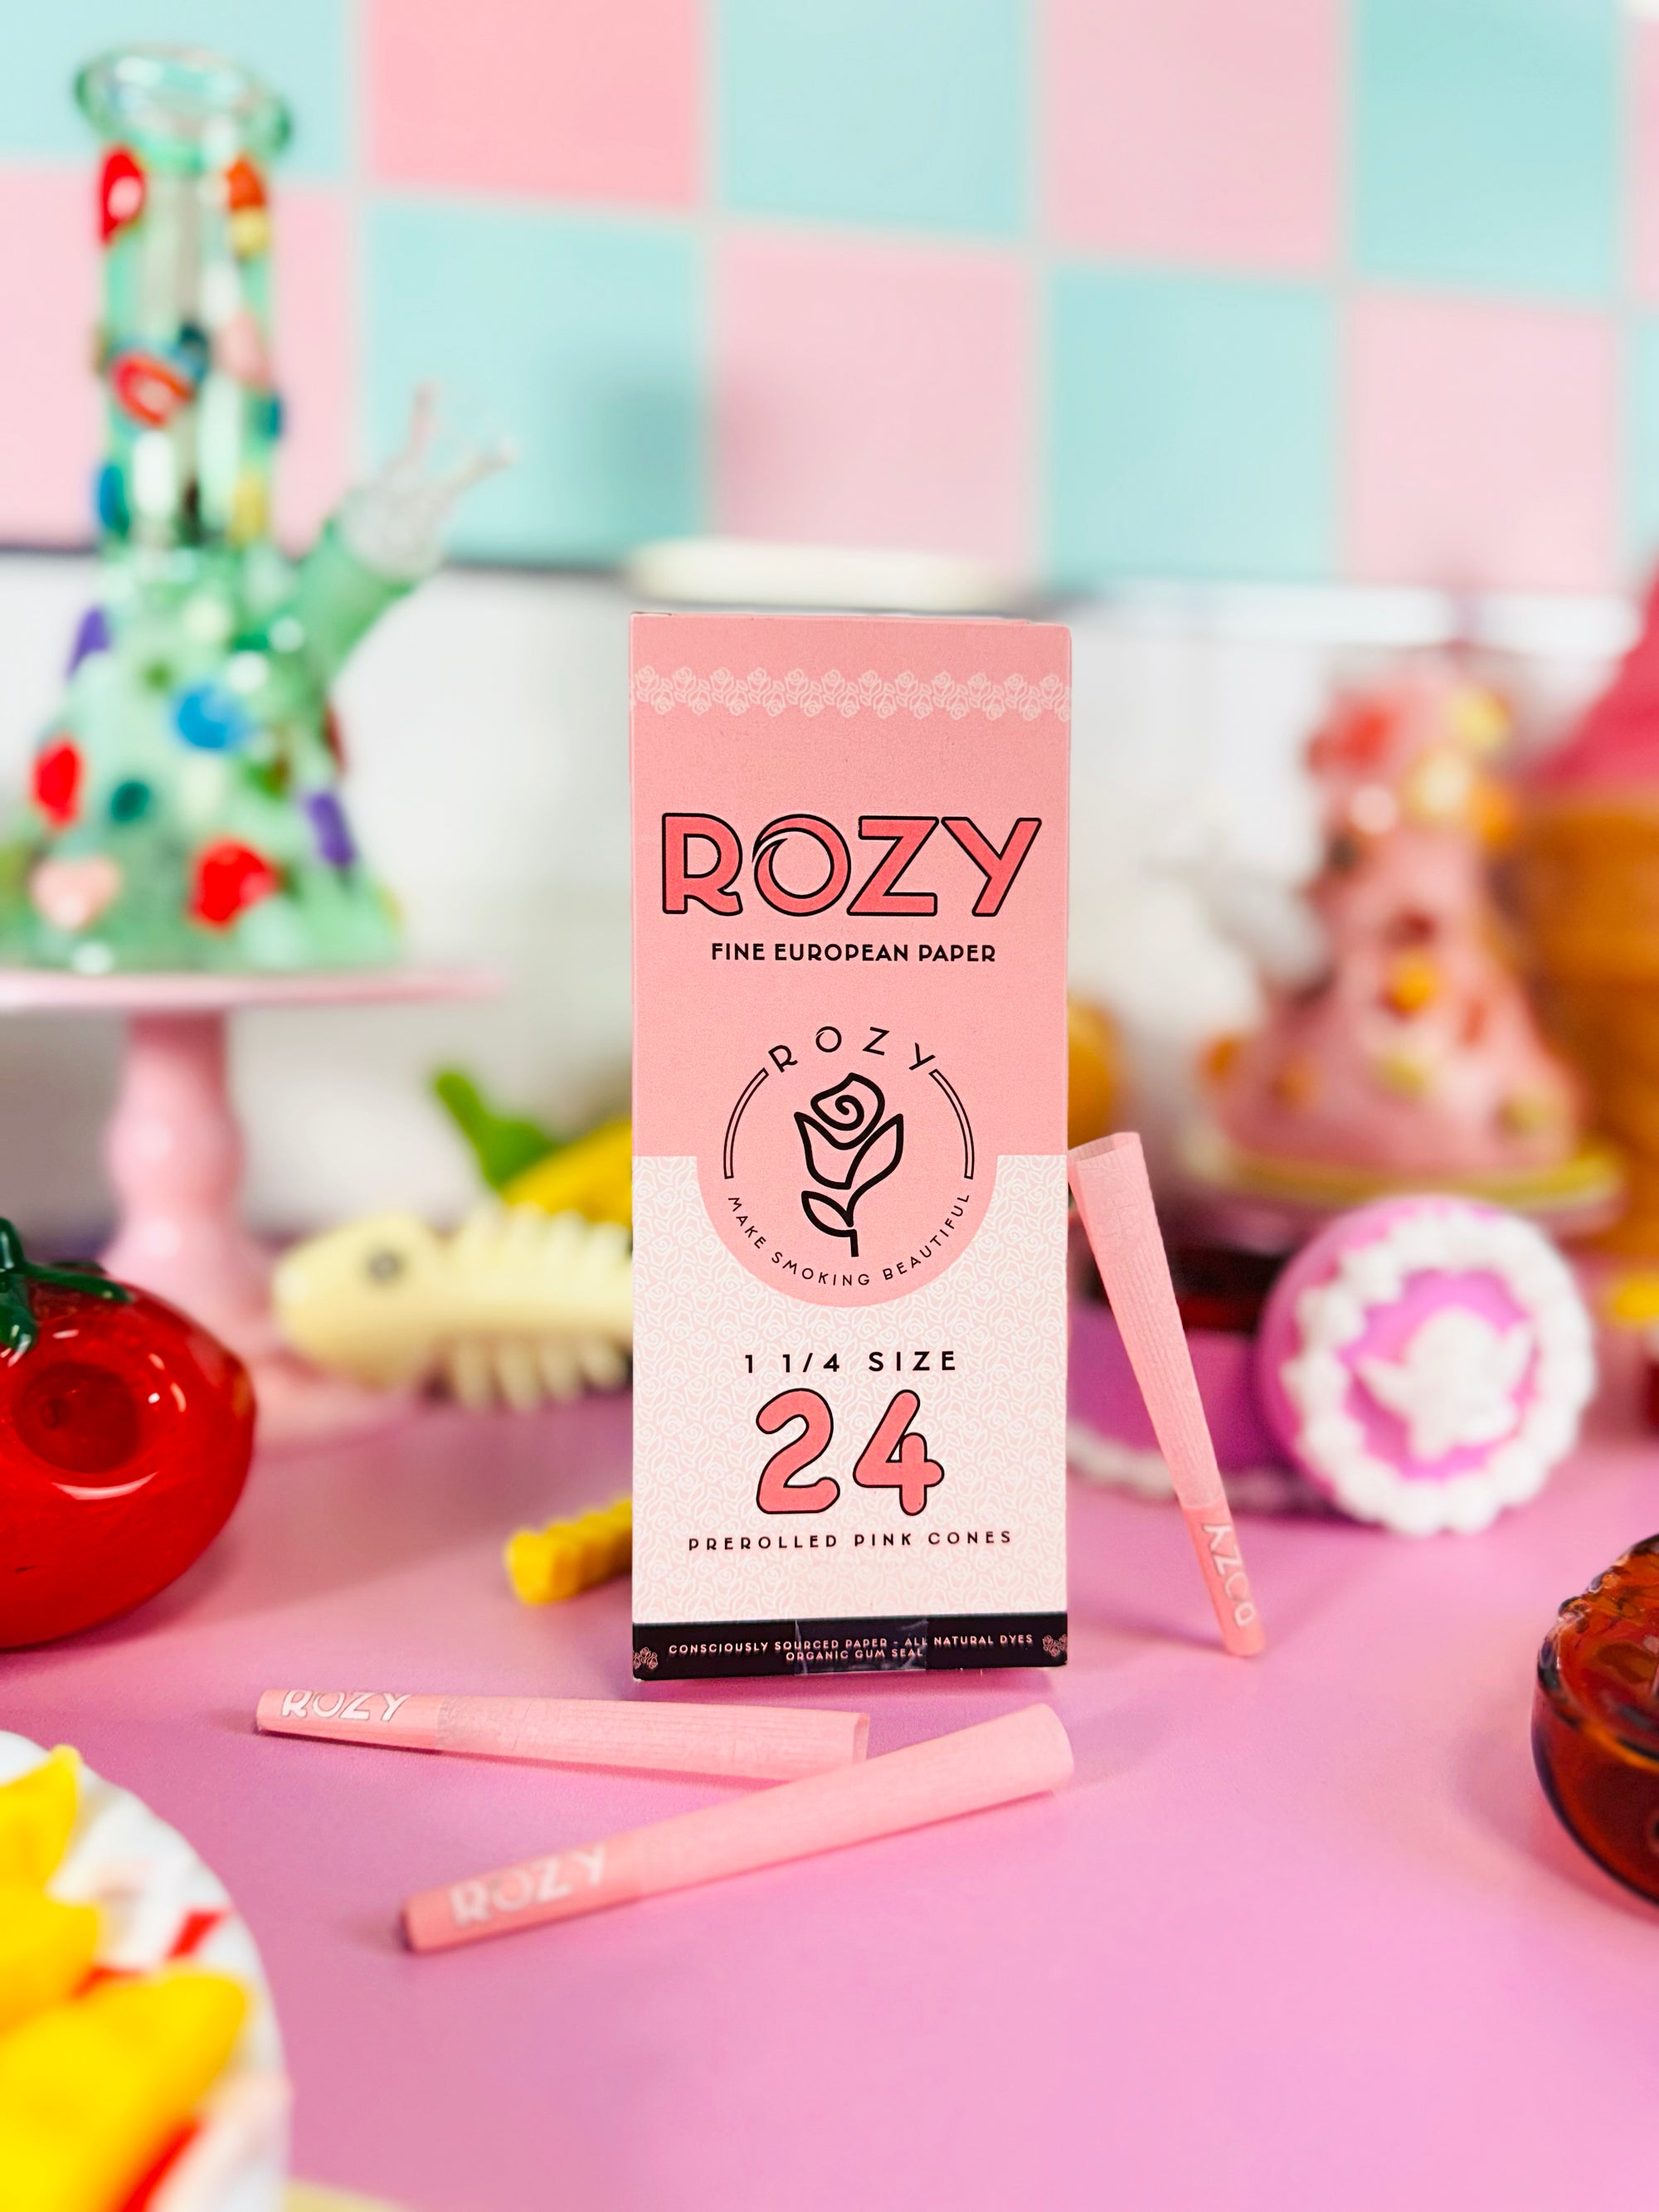 Rozy Pink Cones 24 pack